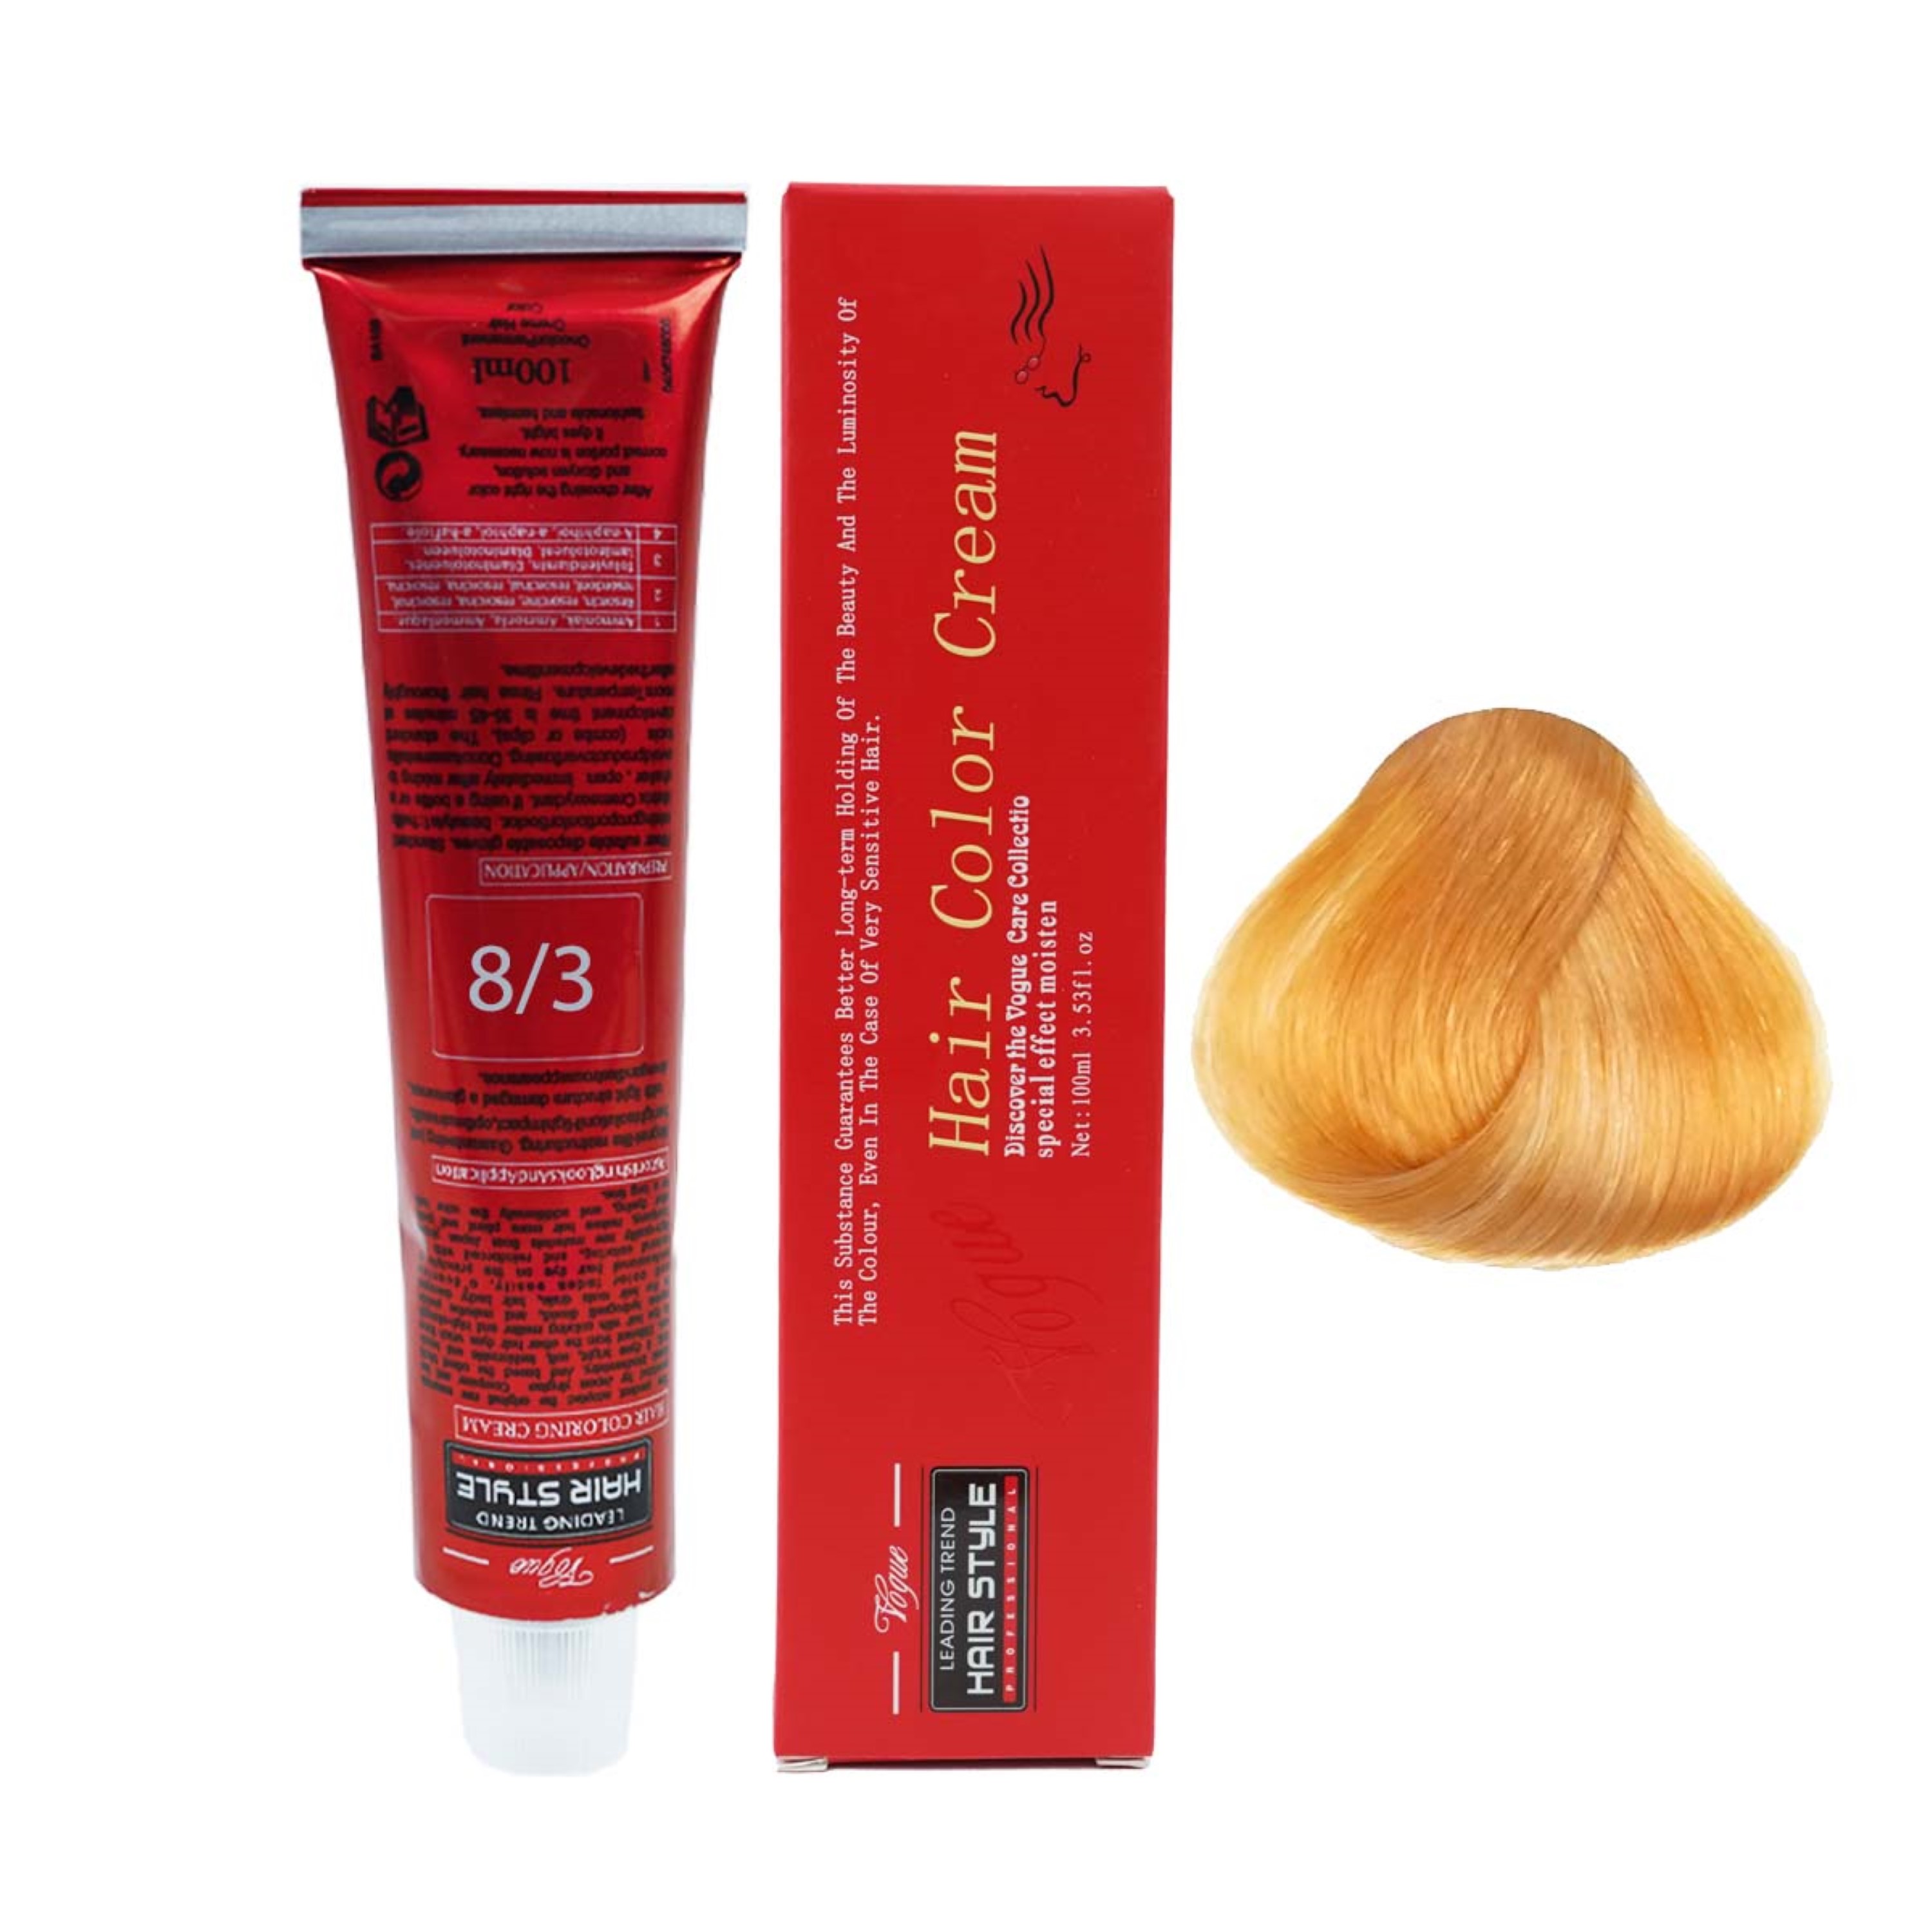 Xie Shi Hair Color Cream 100ml - No. 8/3, Light Golden Blonde | Wholesale |  Tradeling